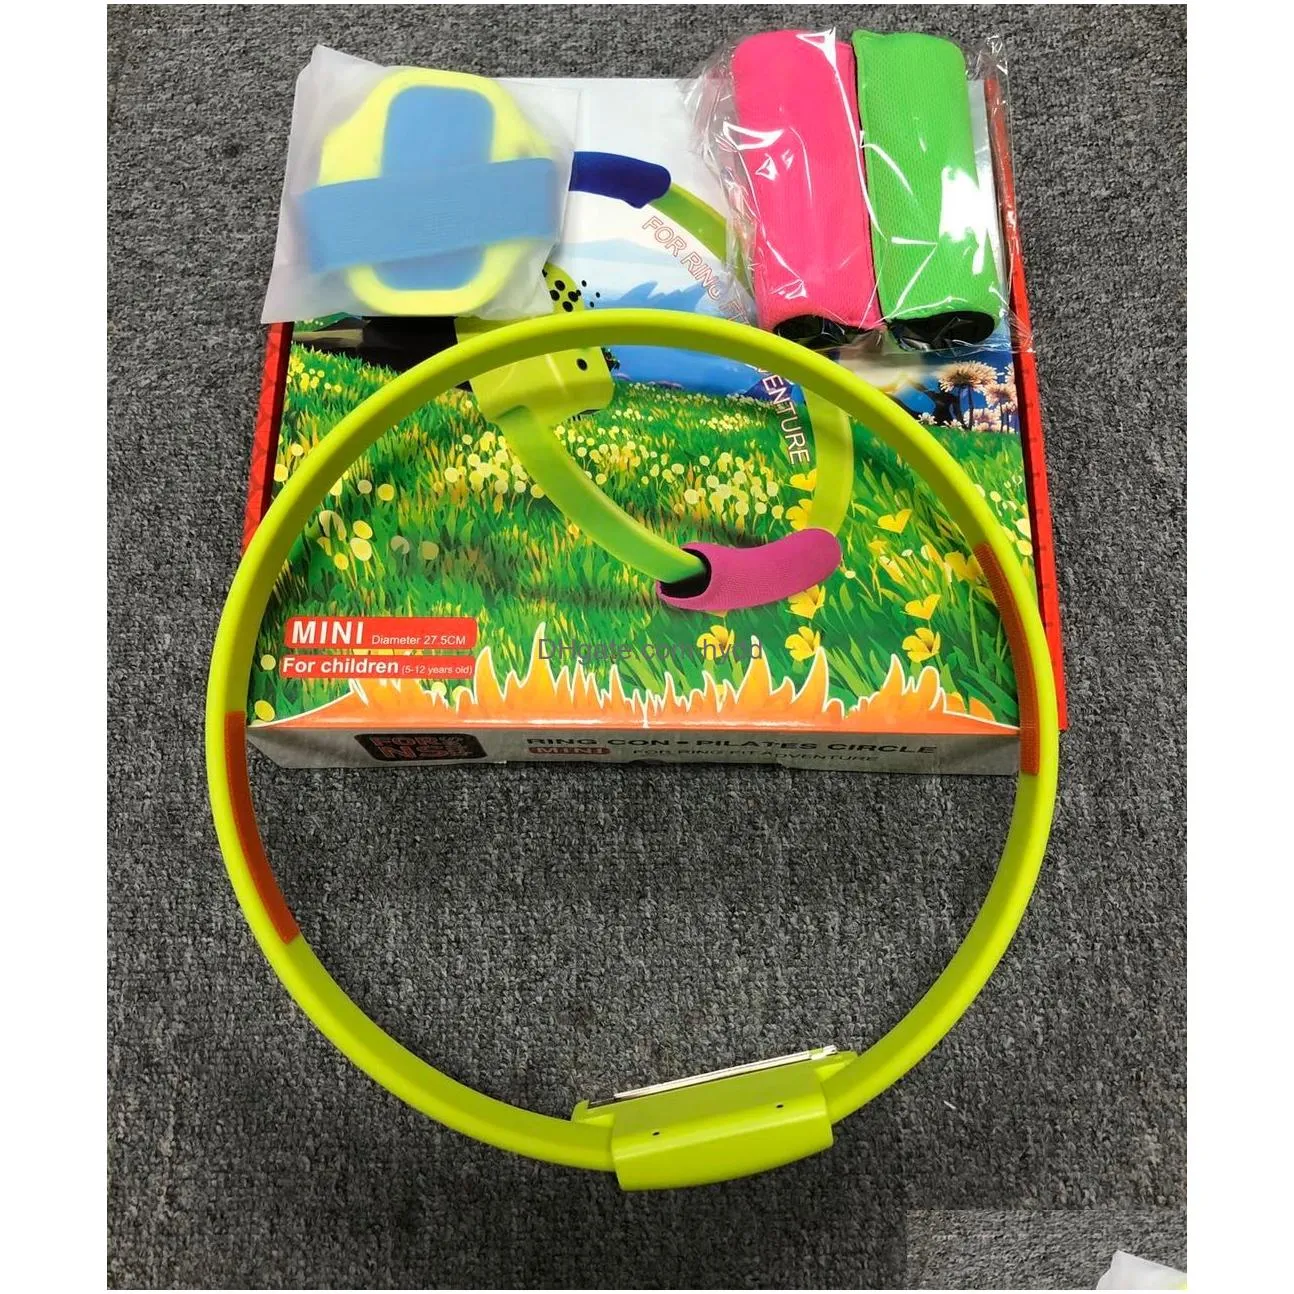 dhs for ns switch ring con plates circle mini for children home game with leg strap for ring fit adventure diameter 275cm3831567